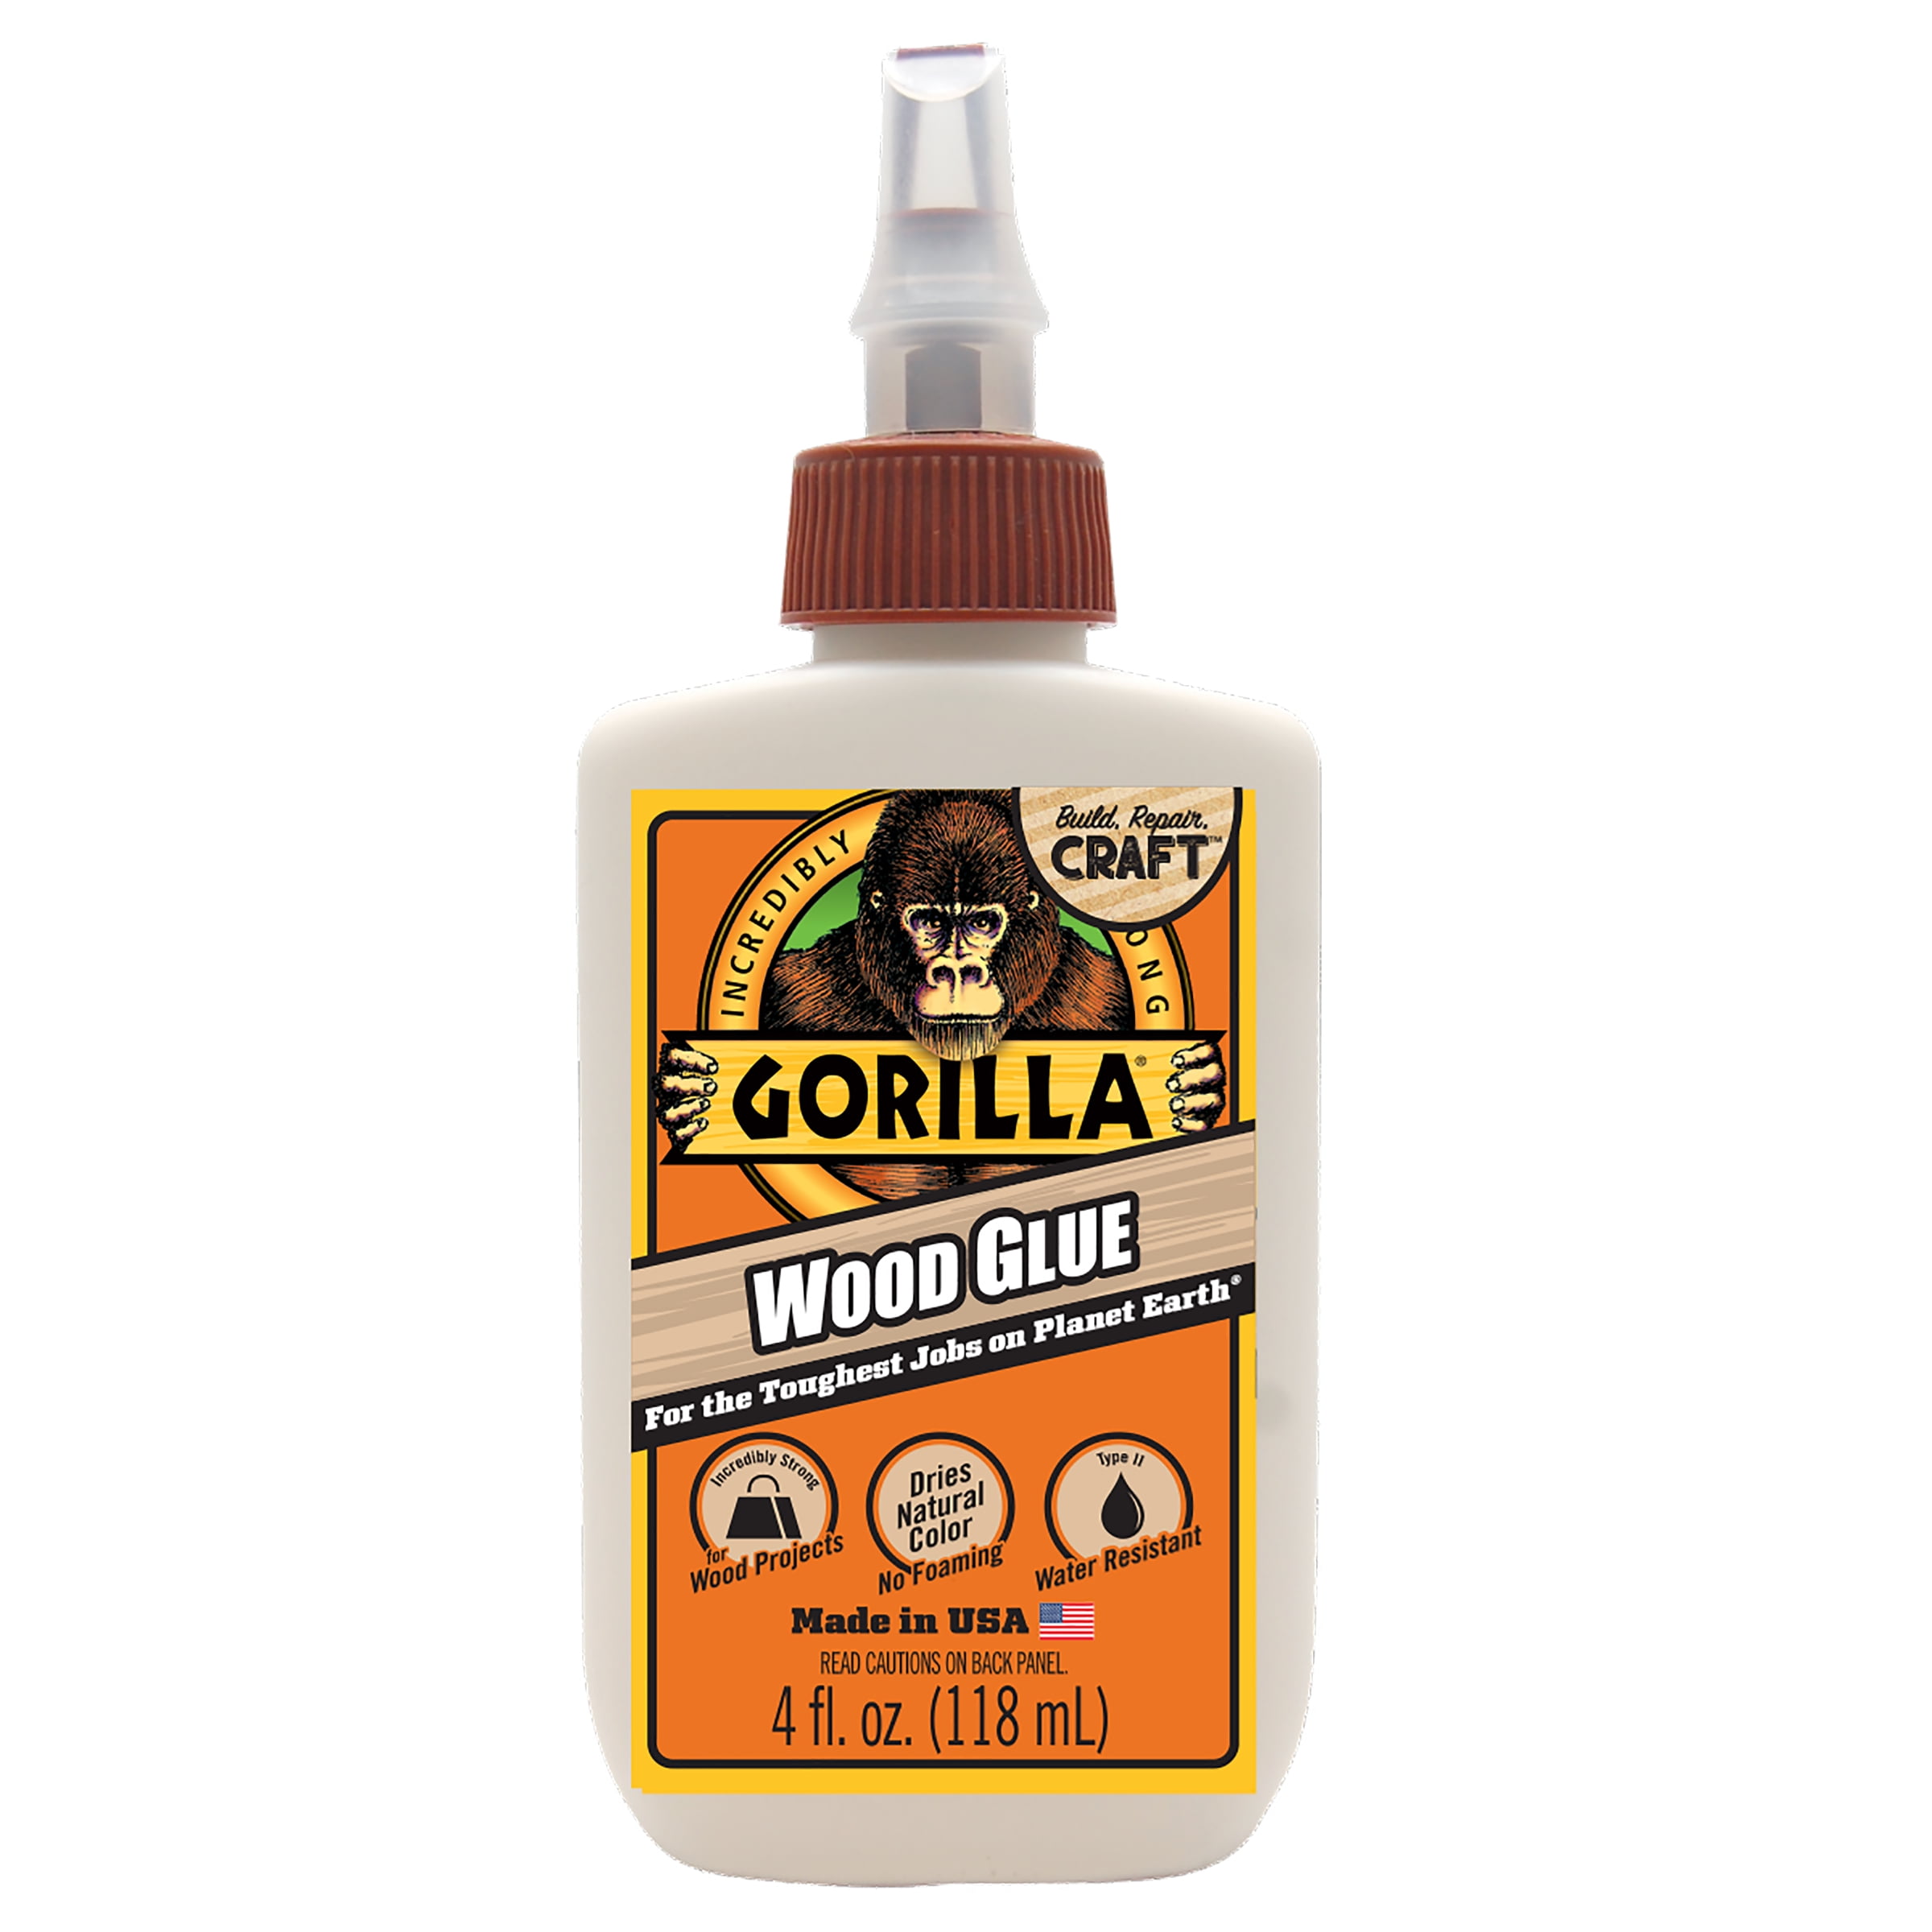 Furniture Glue Manufacturers and Suppliers in the USA